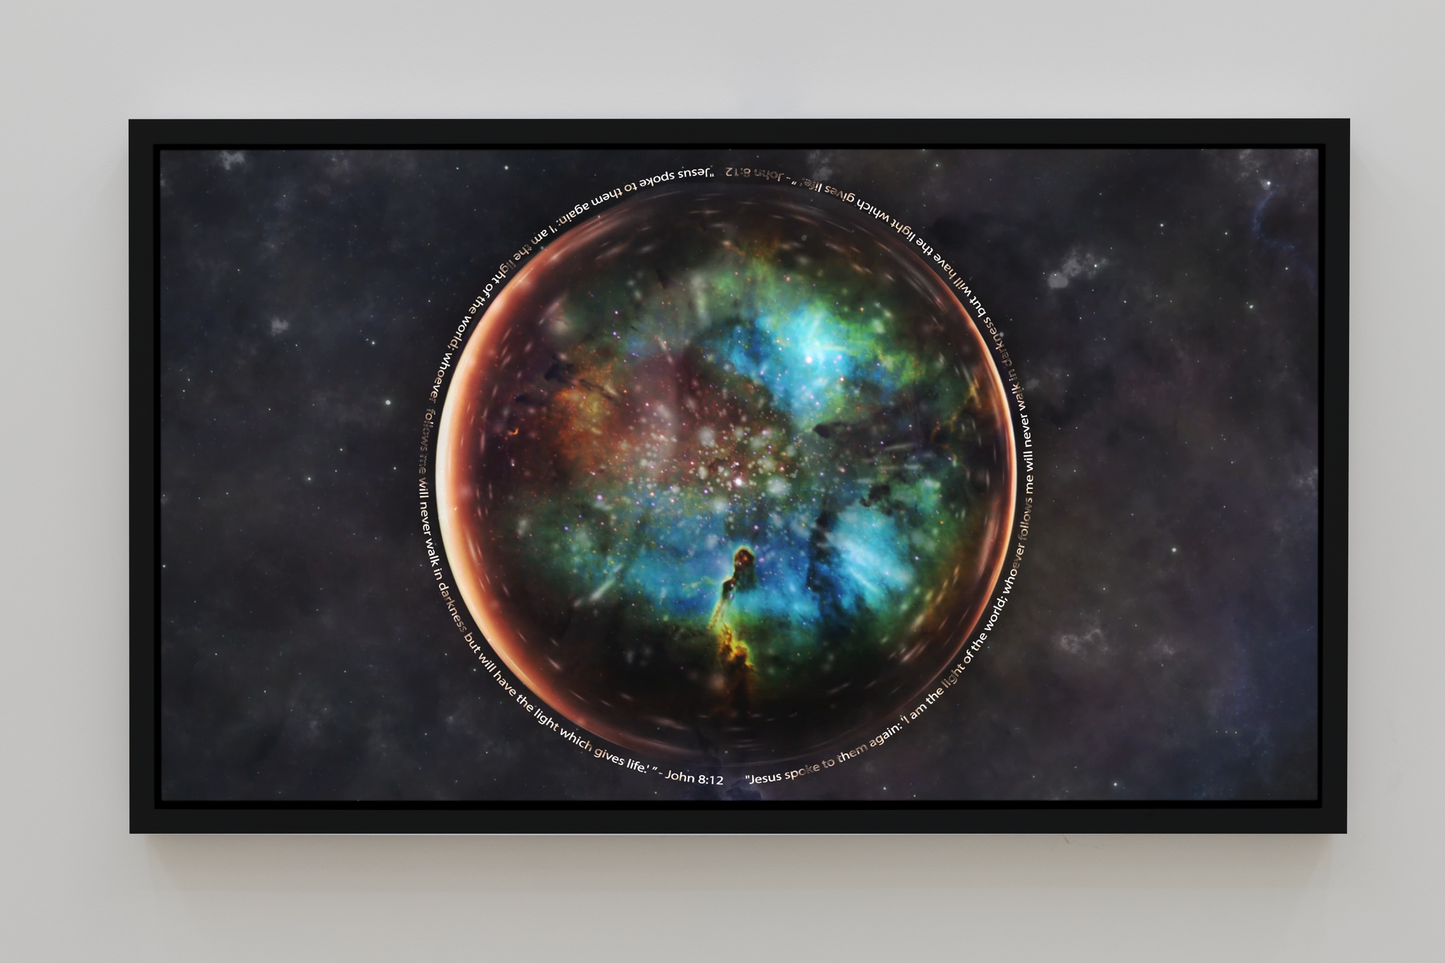 Emerald Nebula - 1 Chronicles 16:31 (Sold Out)